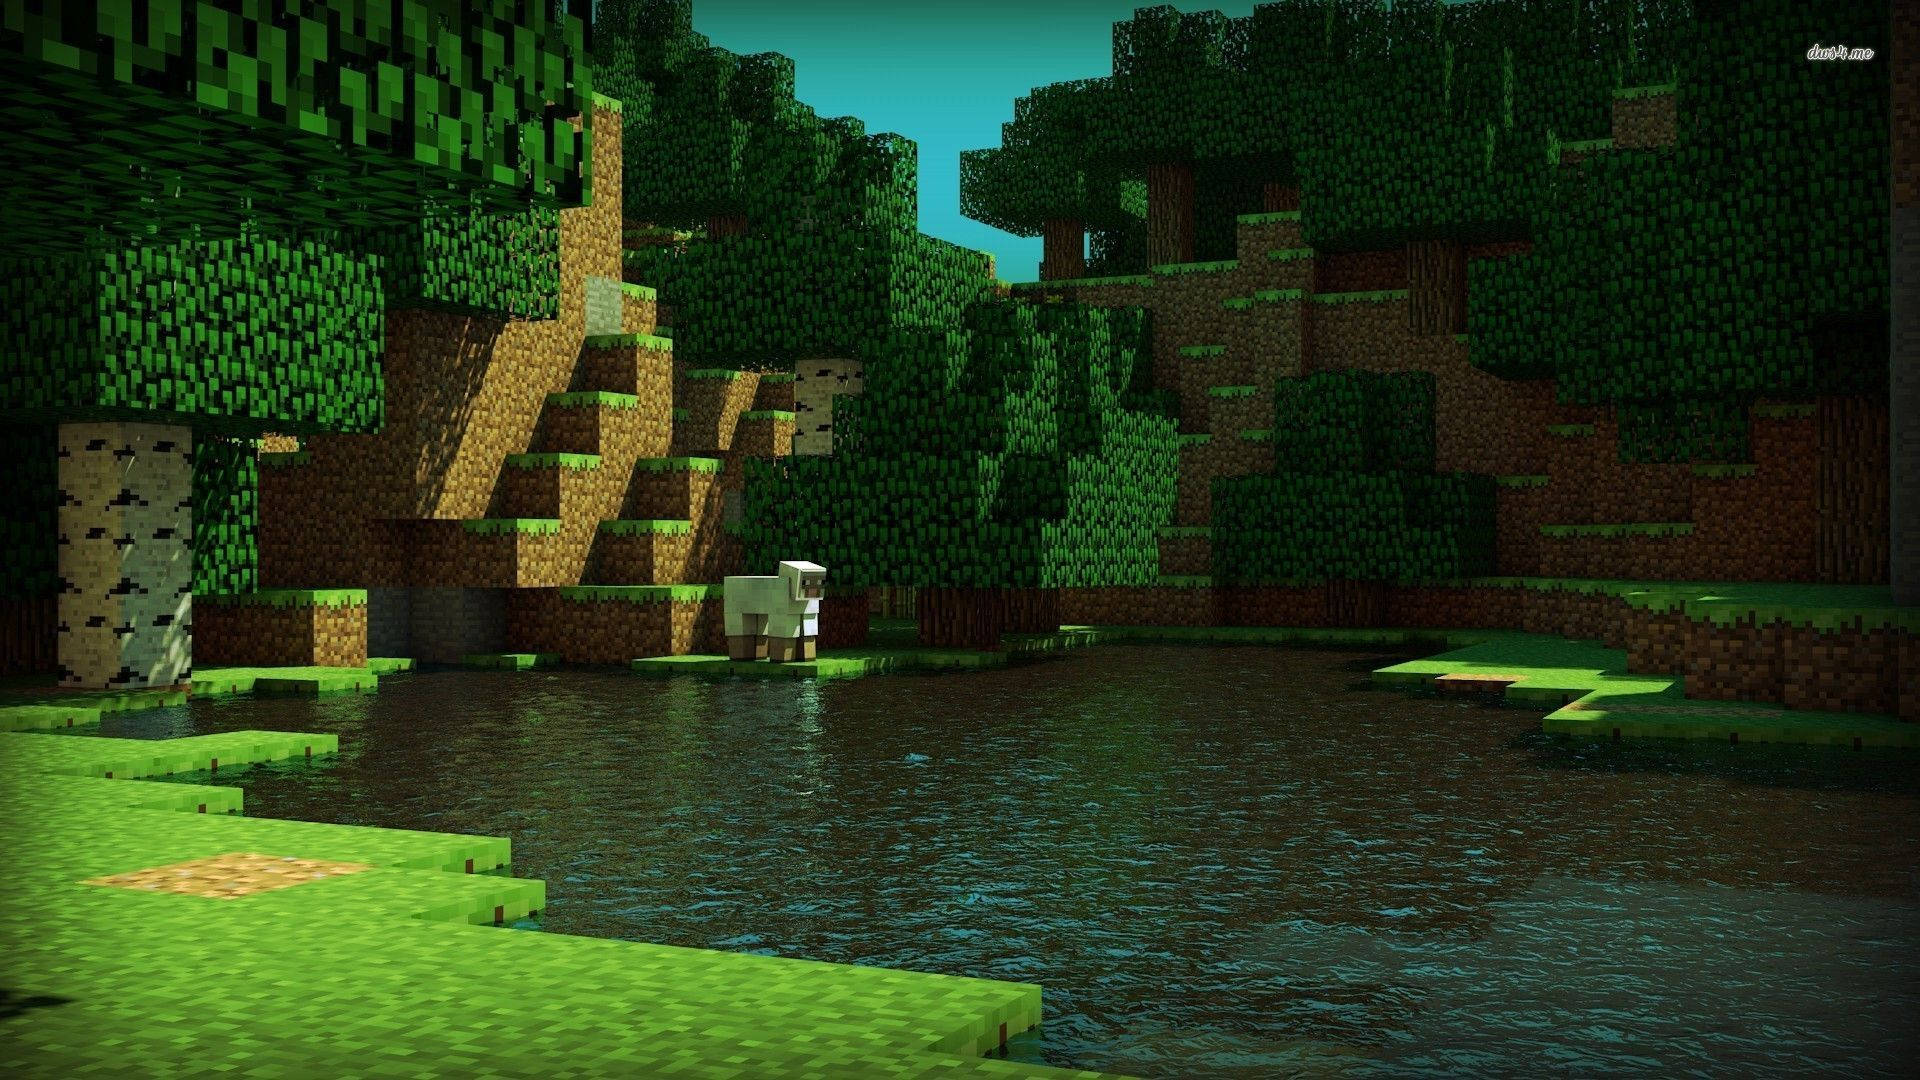 Explore the Green Meadows of the Minecraft World Wallpaper